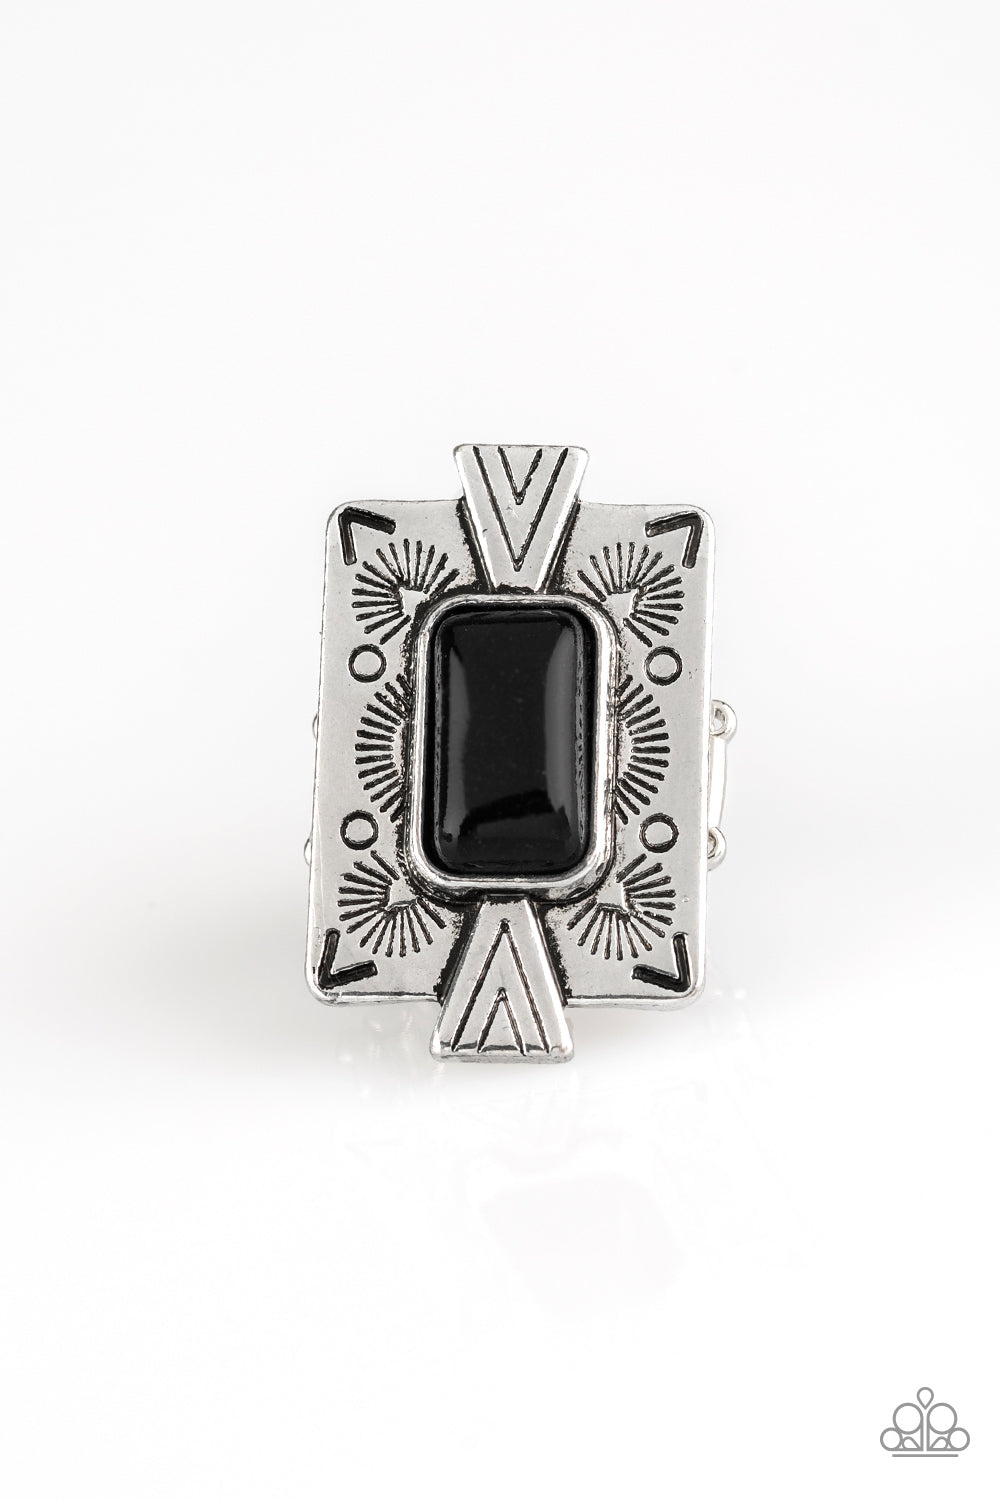 Stone Cold Couture Black Ring - Daria's Blings N Things